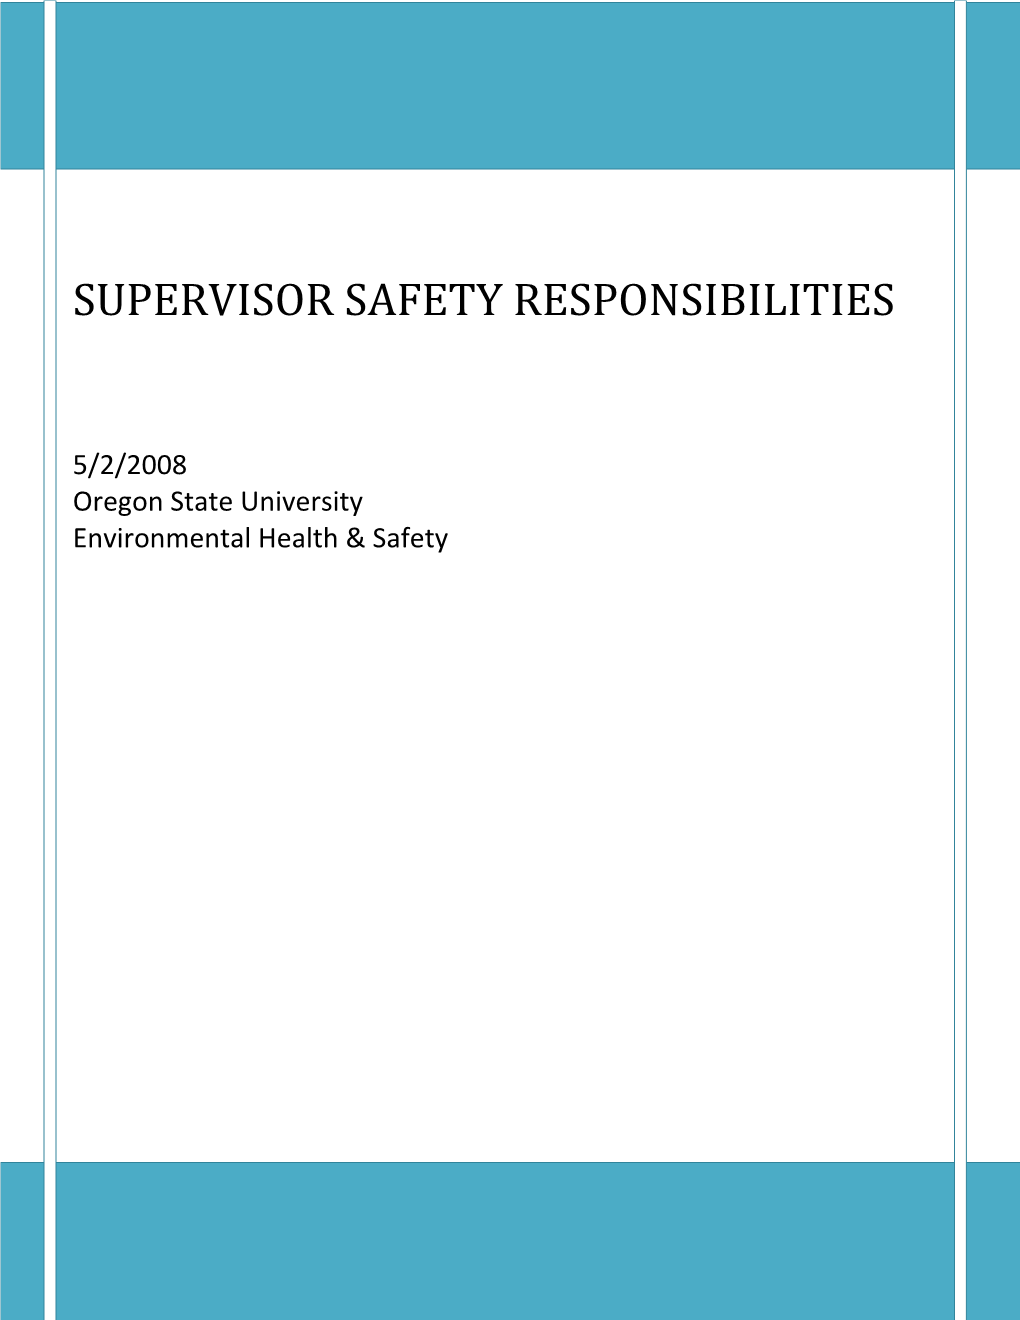 Supervisor Safety Responsibilities